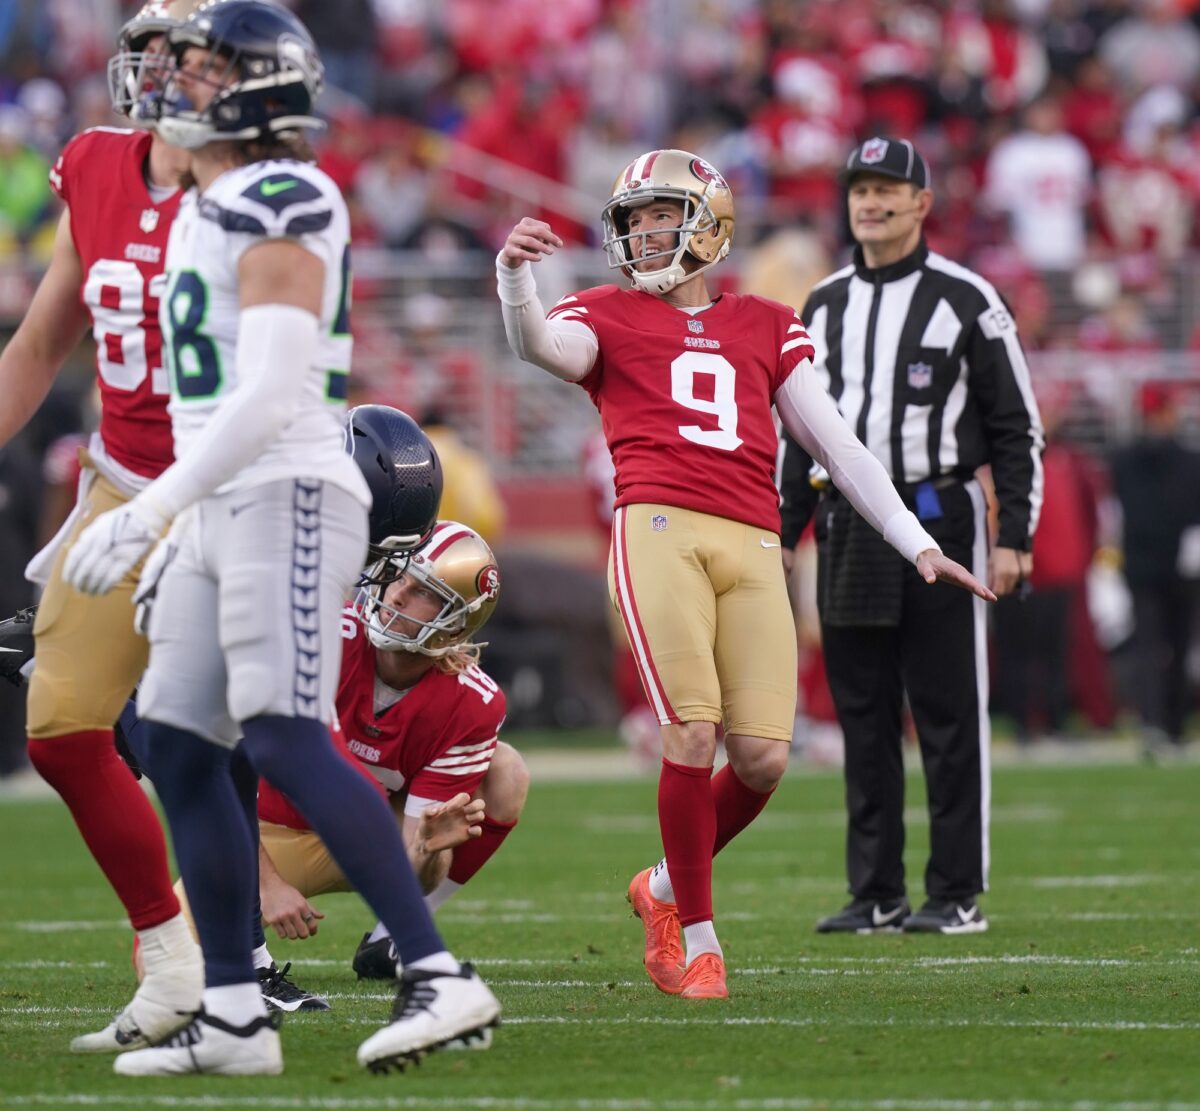 Robbie Gould remains perfect in NFL postseason